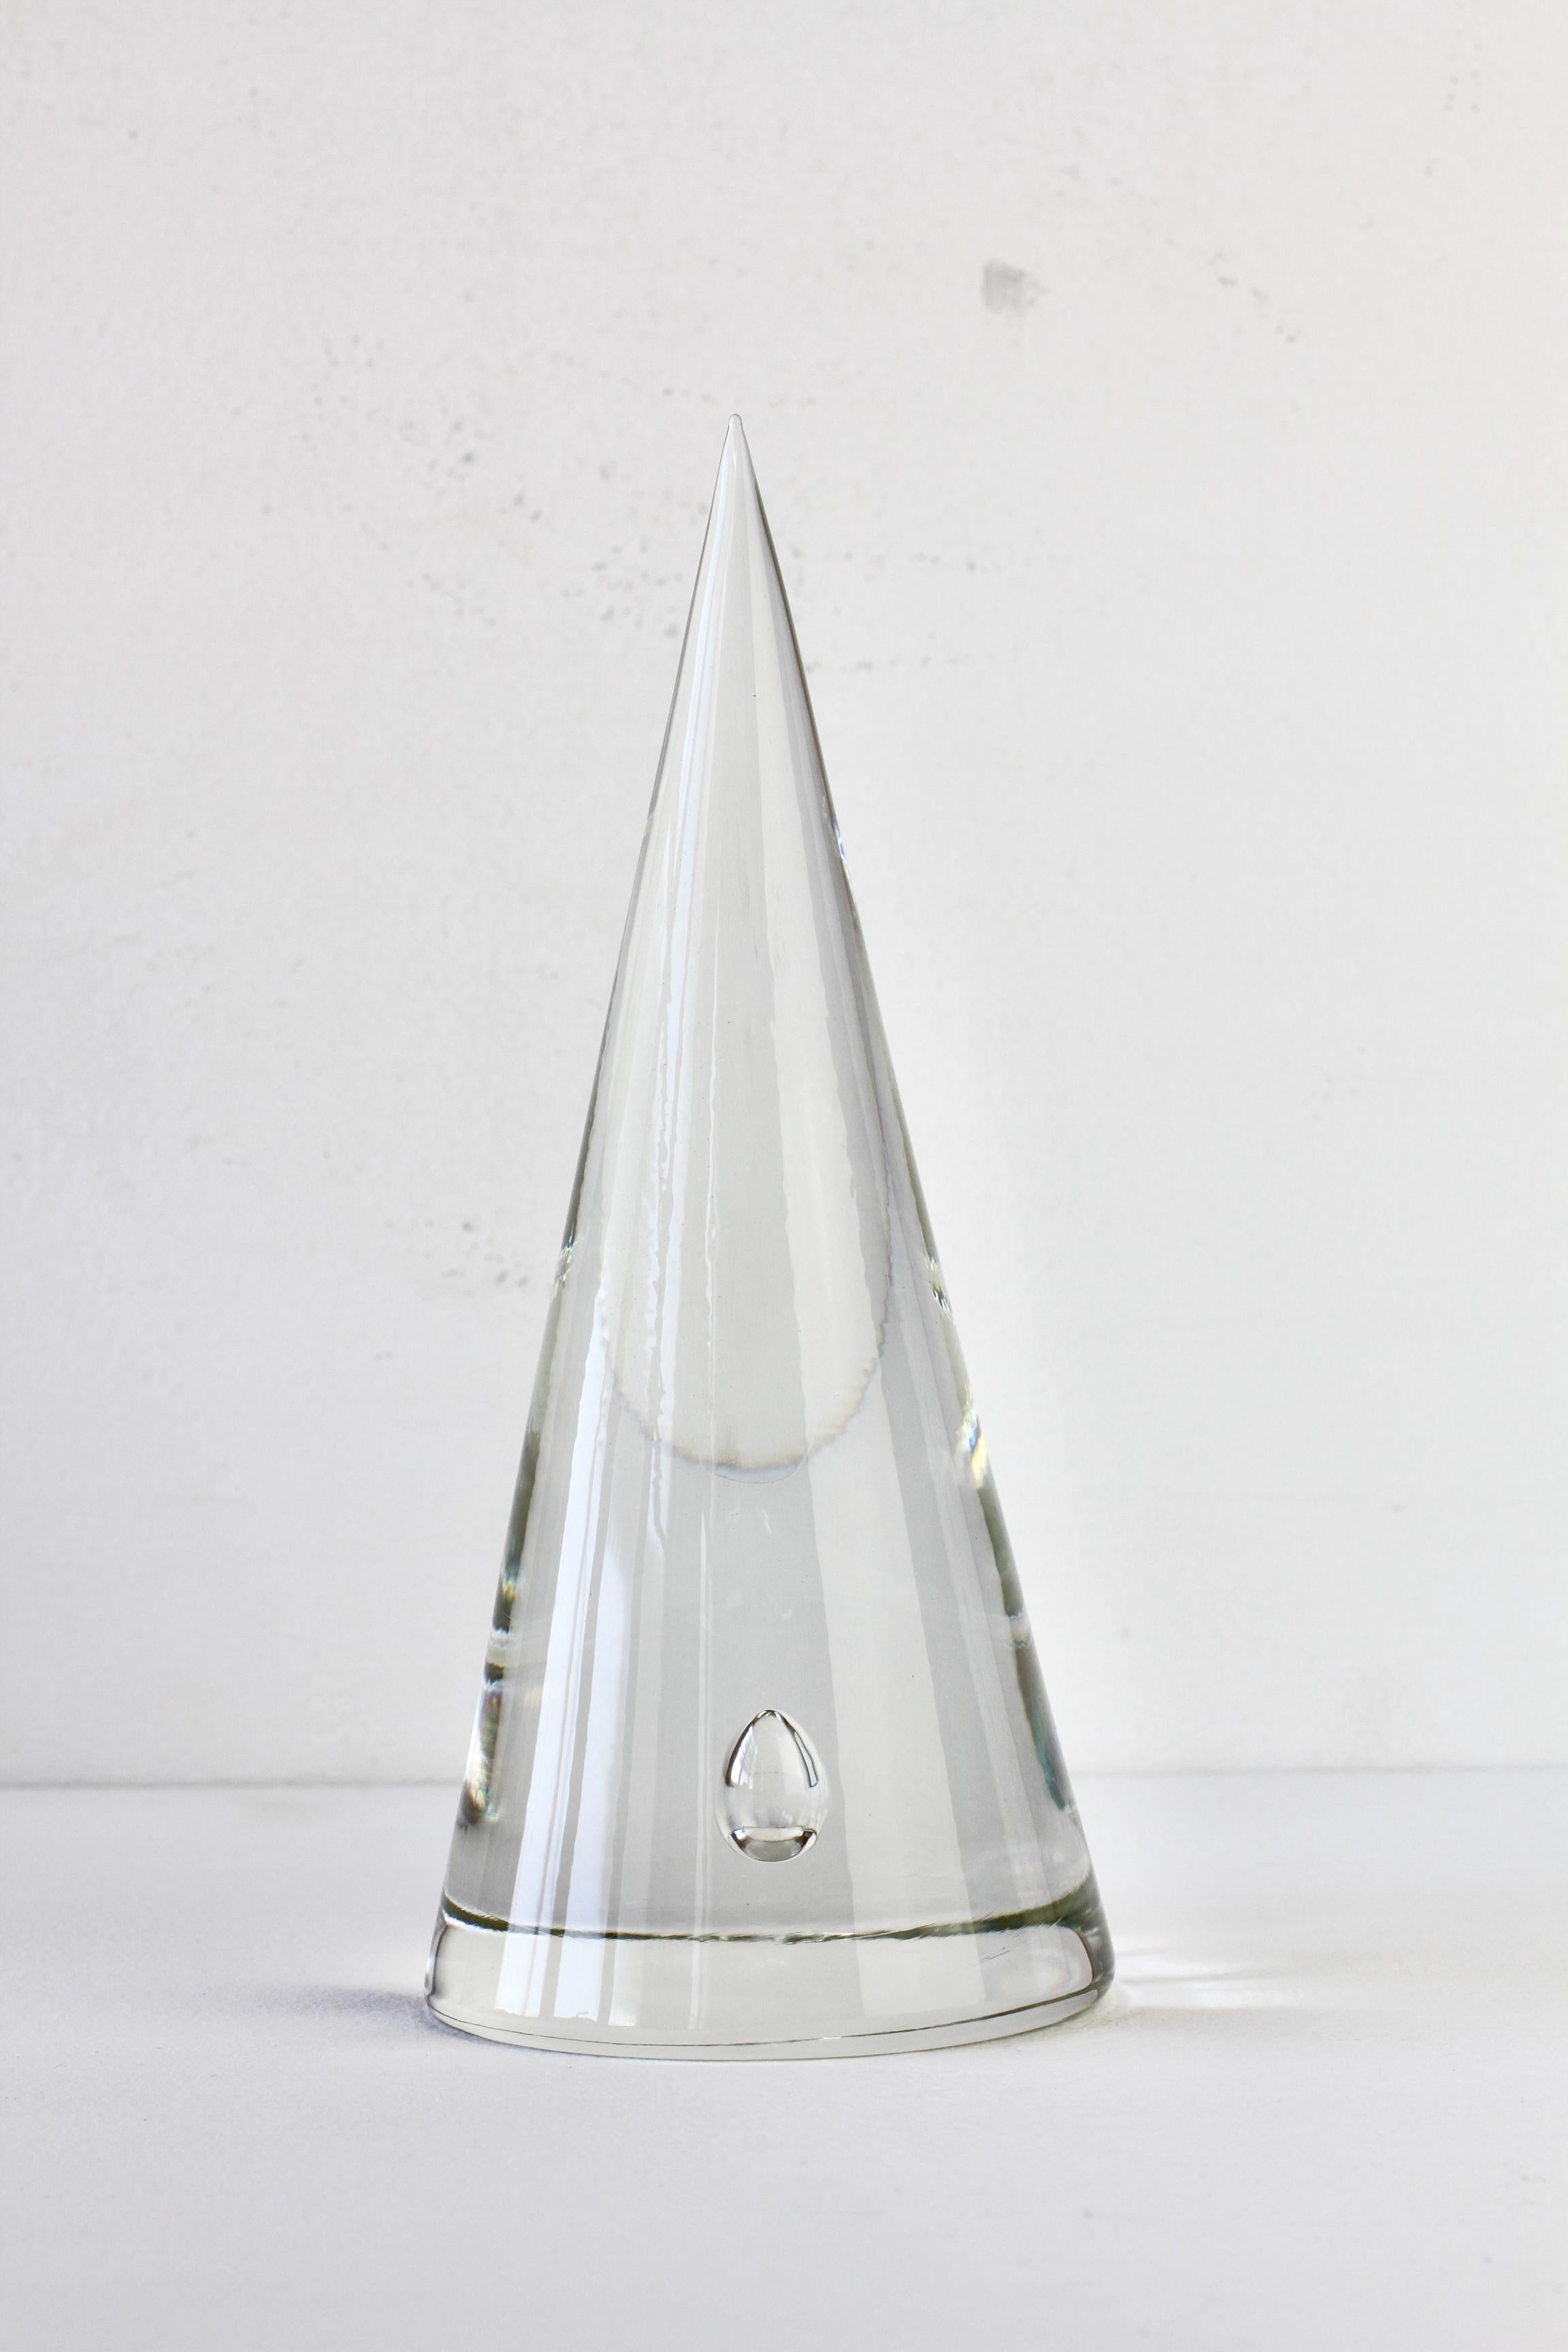 Rare, Mid-Century Modern vintage signed cone shaped paperweight with singular trapped air bubble inclusion within the clear glass. The design of this conical shaped desk paperweight / ornament is attributed to master Murano glass designer Antonio da